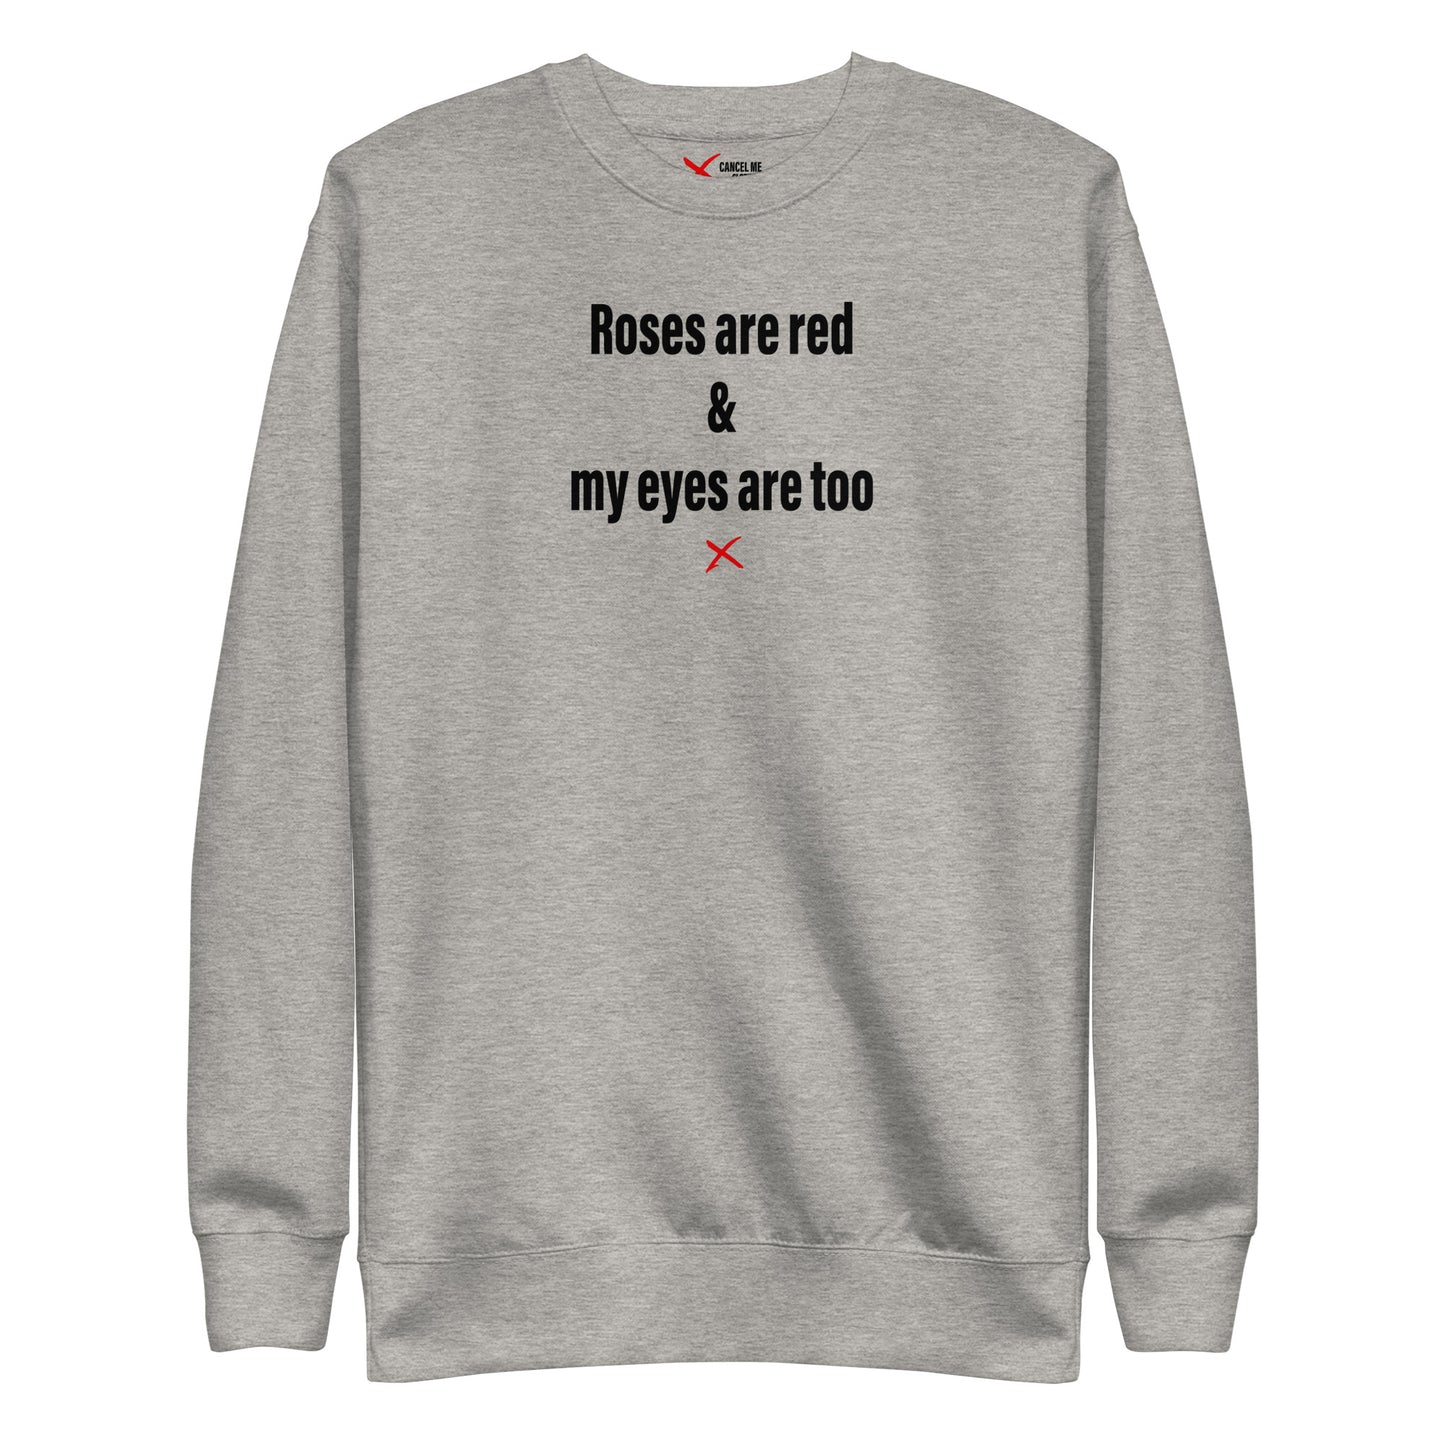 Roses are red & my eyes are too - Sweatshirt